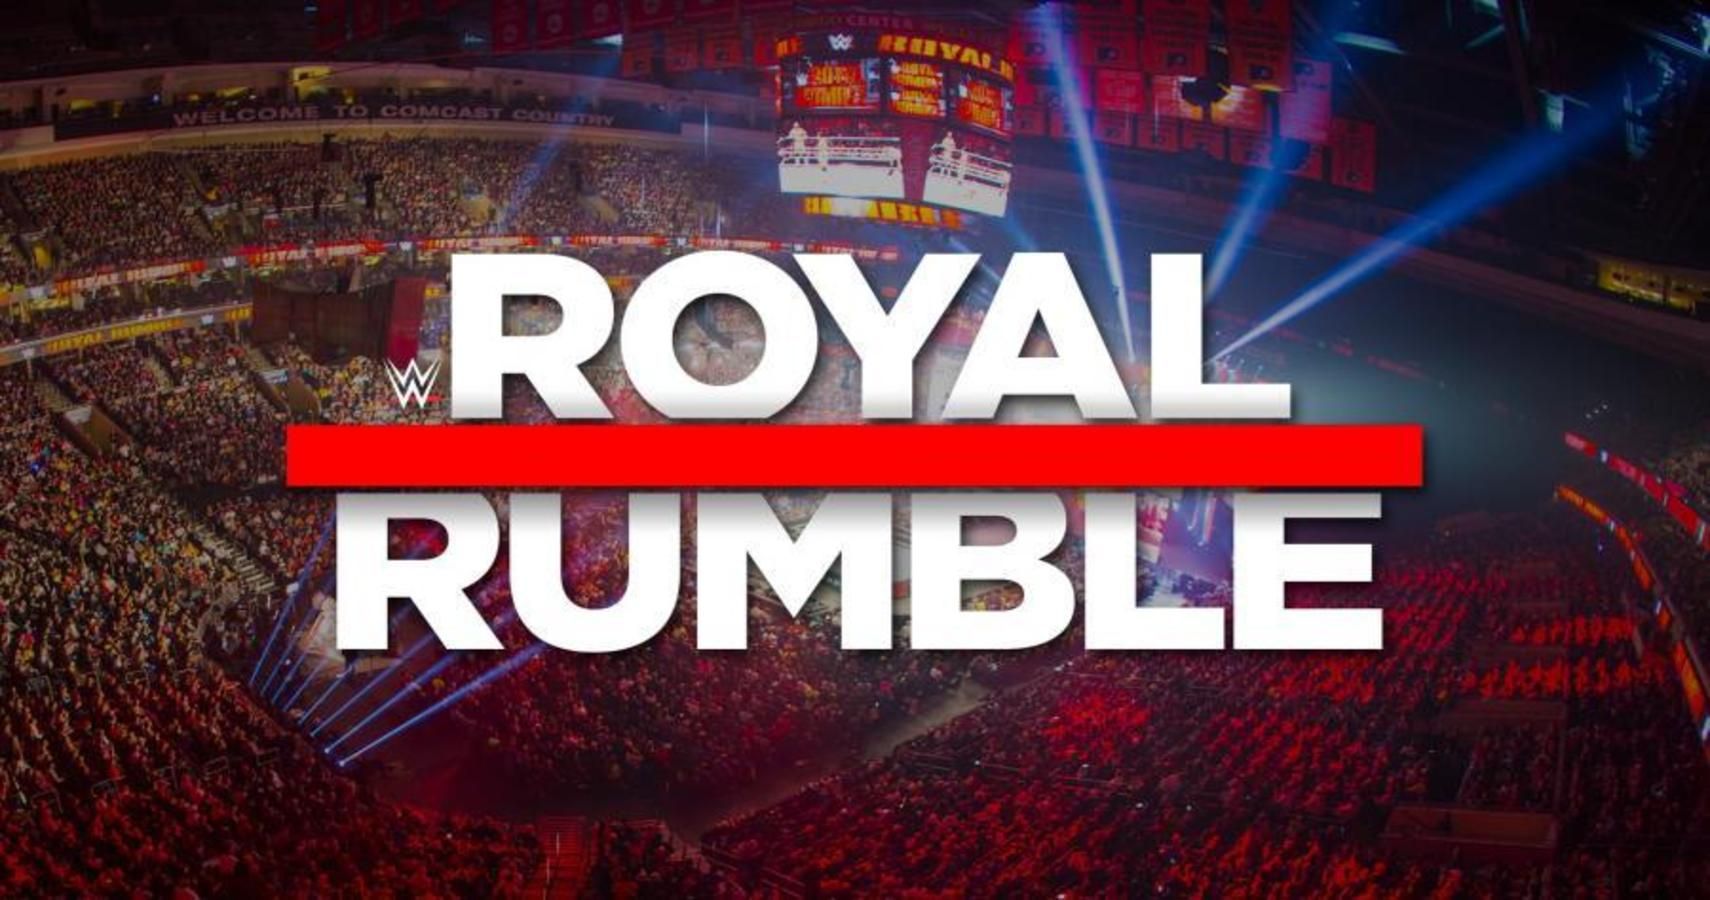 when is wwe royal rumble 2021